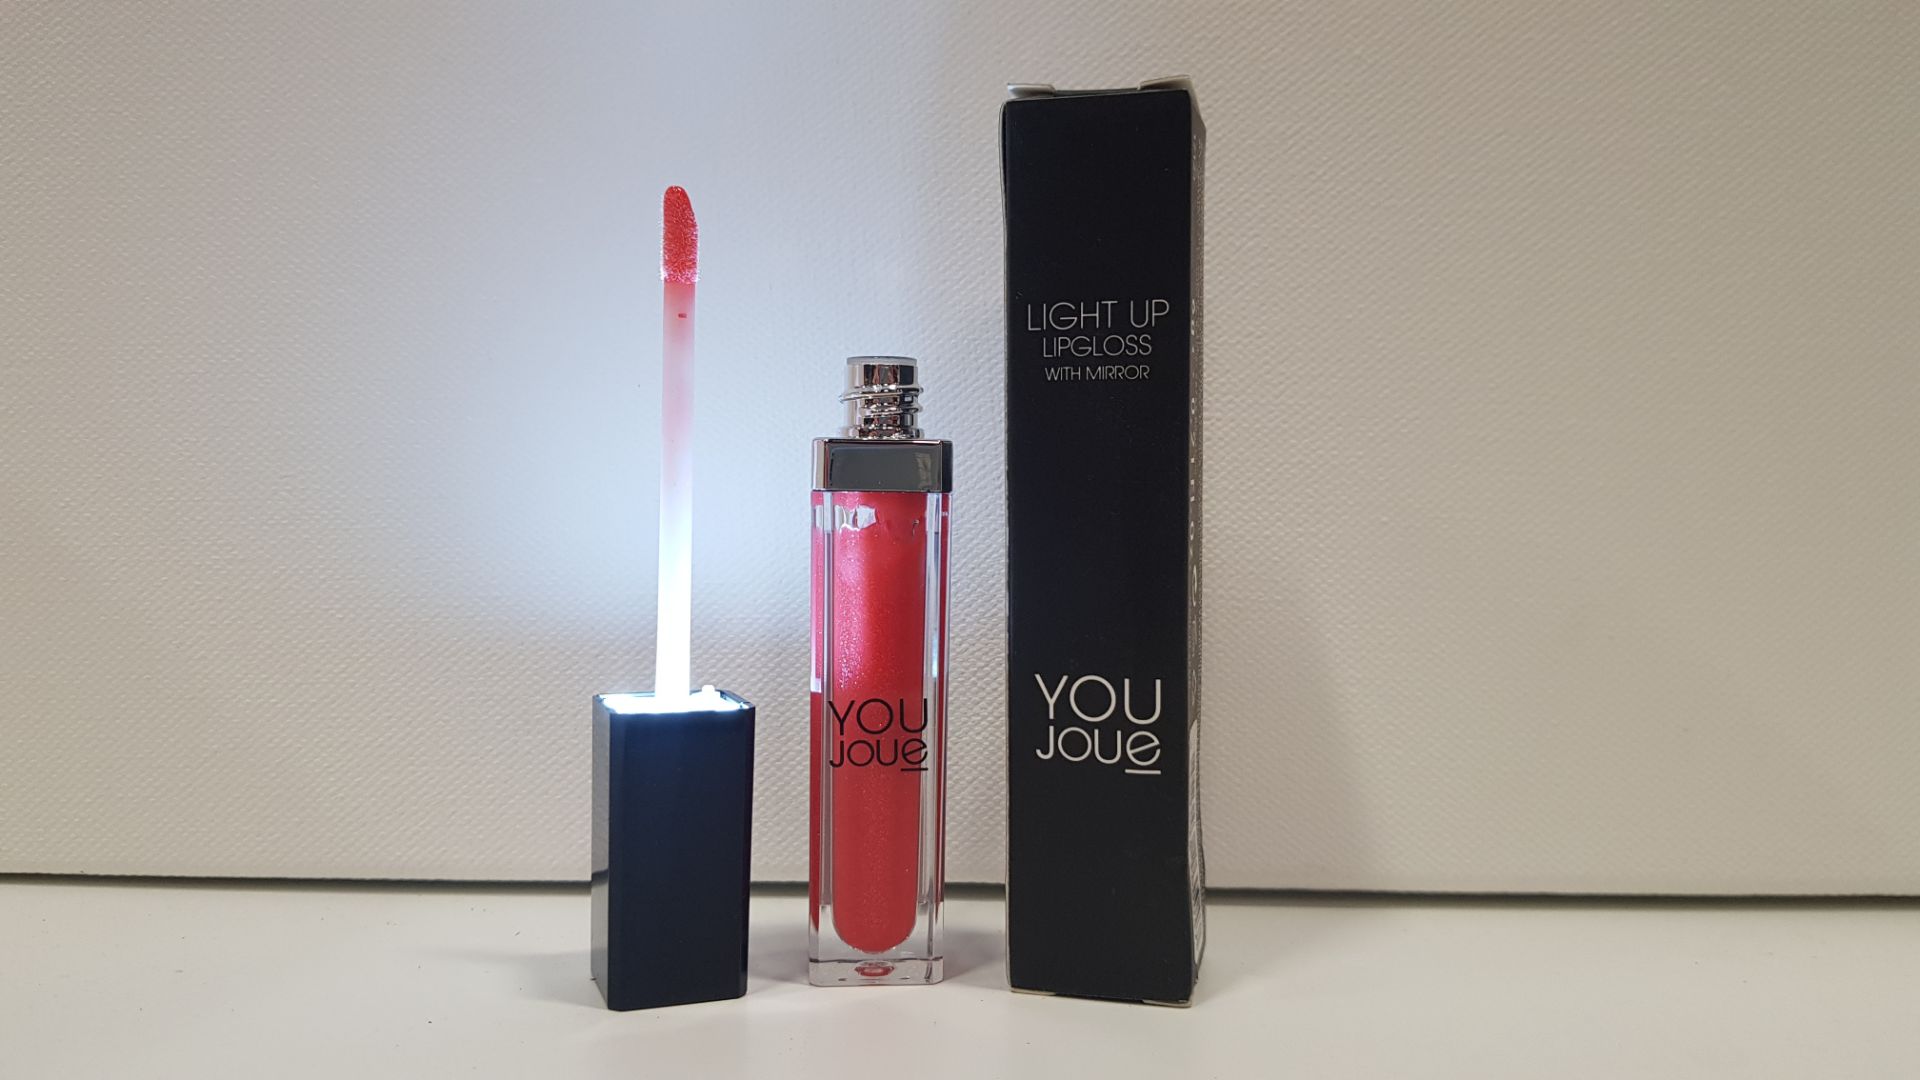 80 X LIGHT UP LIP GLOSS WITH MIRROR - YOU JOUE - RED (JUICY GUAVA) IN RETAIL BOX - IN 1 CARTON (